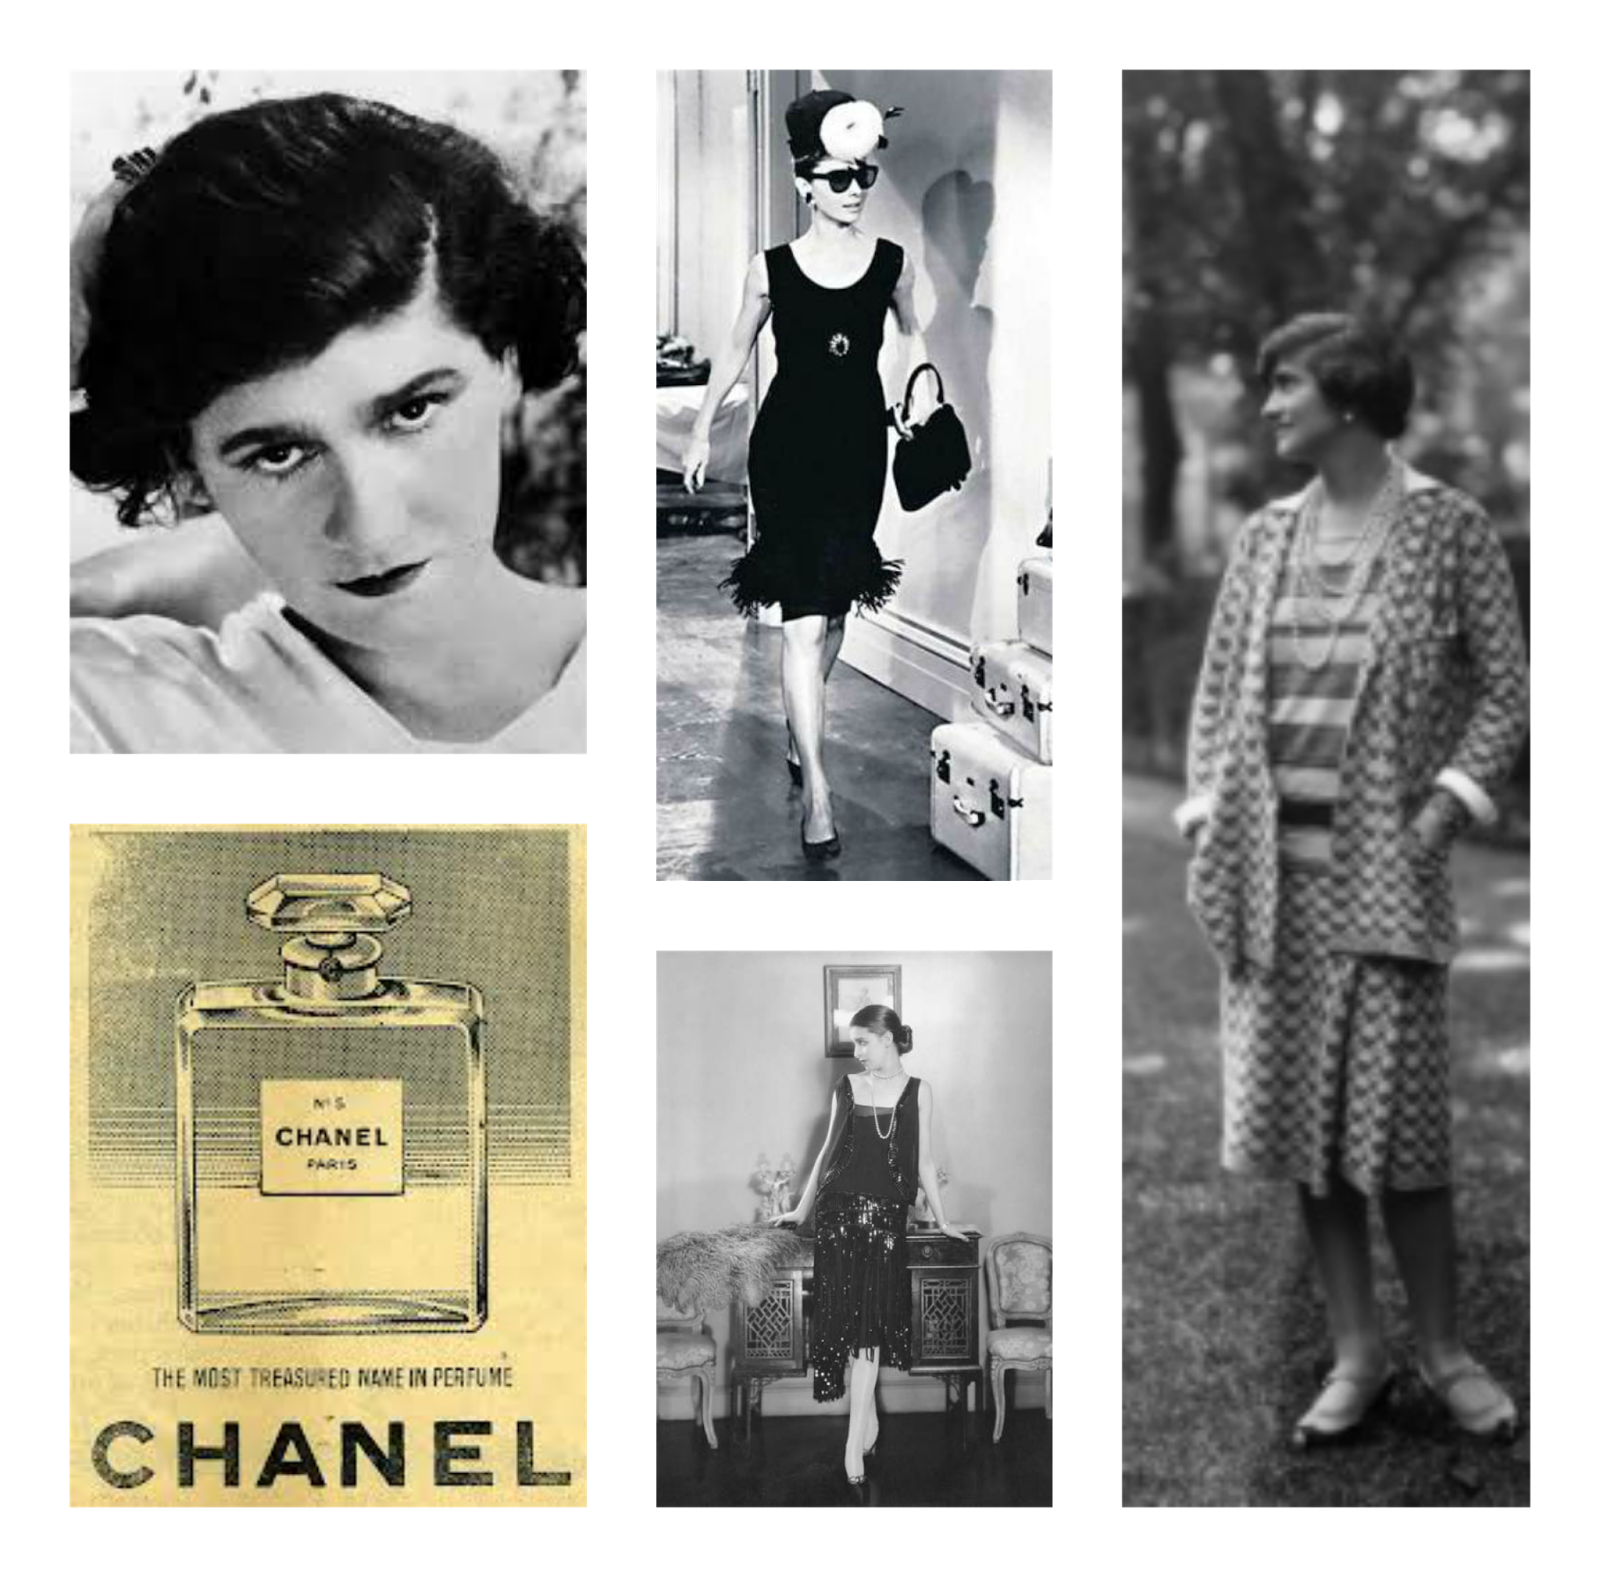 Coco Chanel was a major contributor to the Harlem